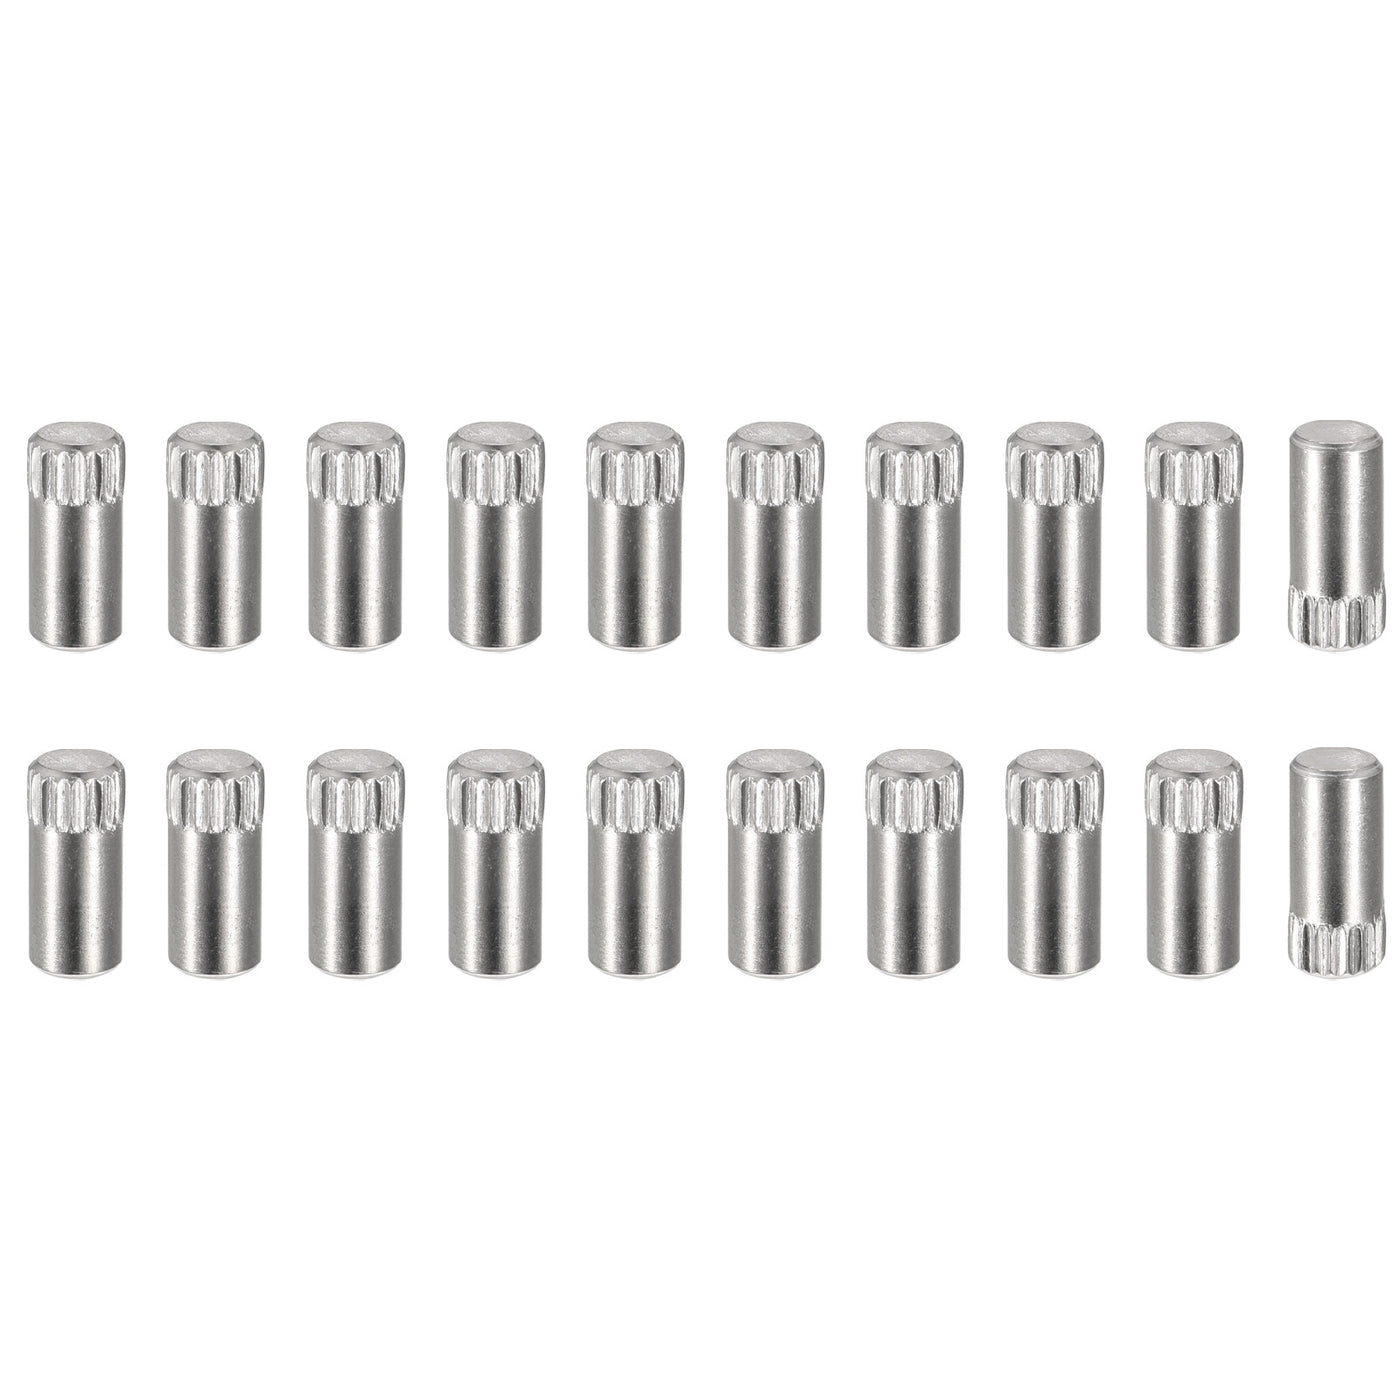 uxcell Uxcell 5x10mm 304 Stainless Steel Dowel Pins, 20Pcs Knurled Head Flat End Dowel Pin